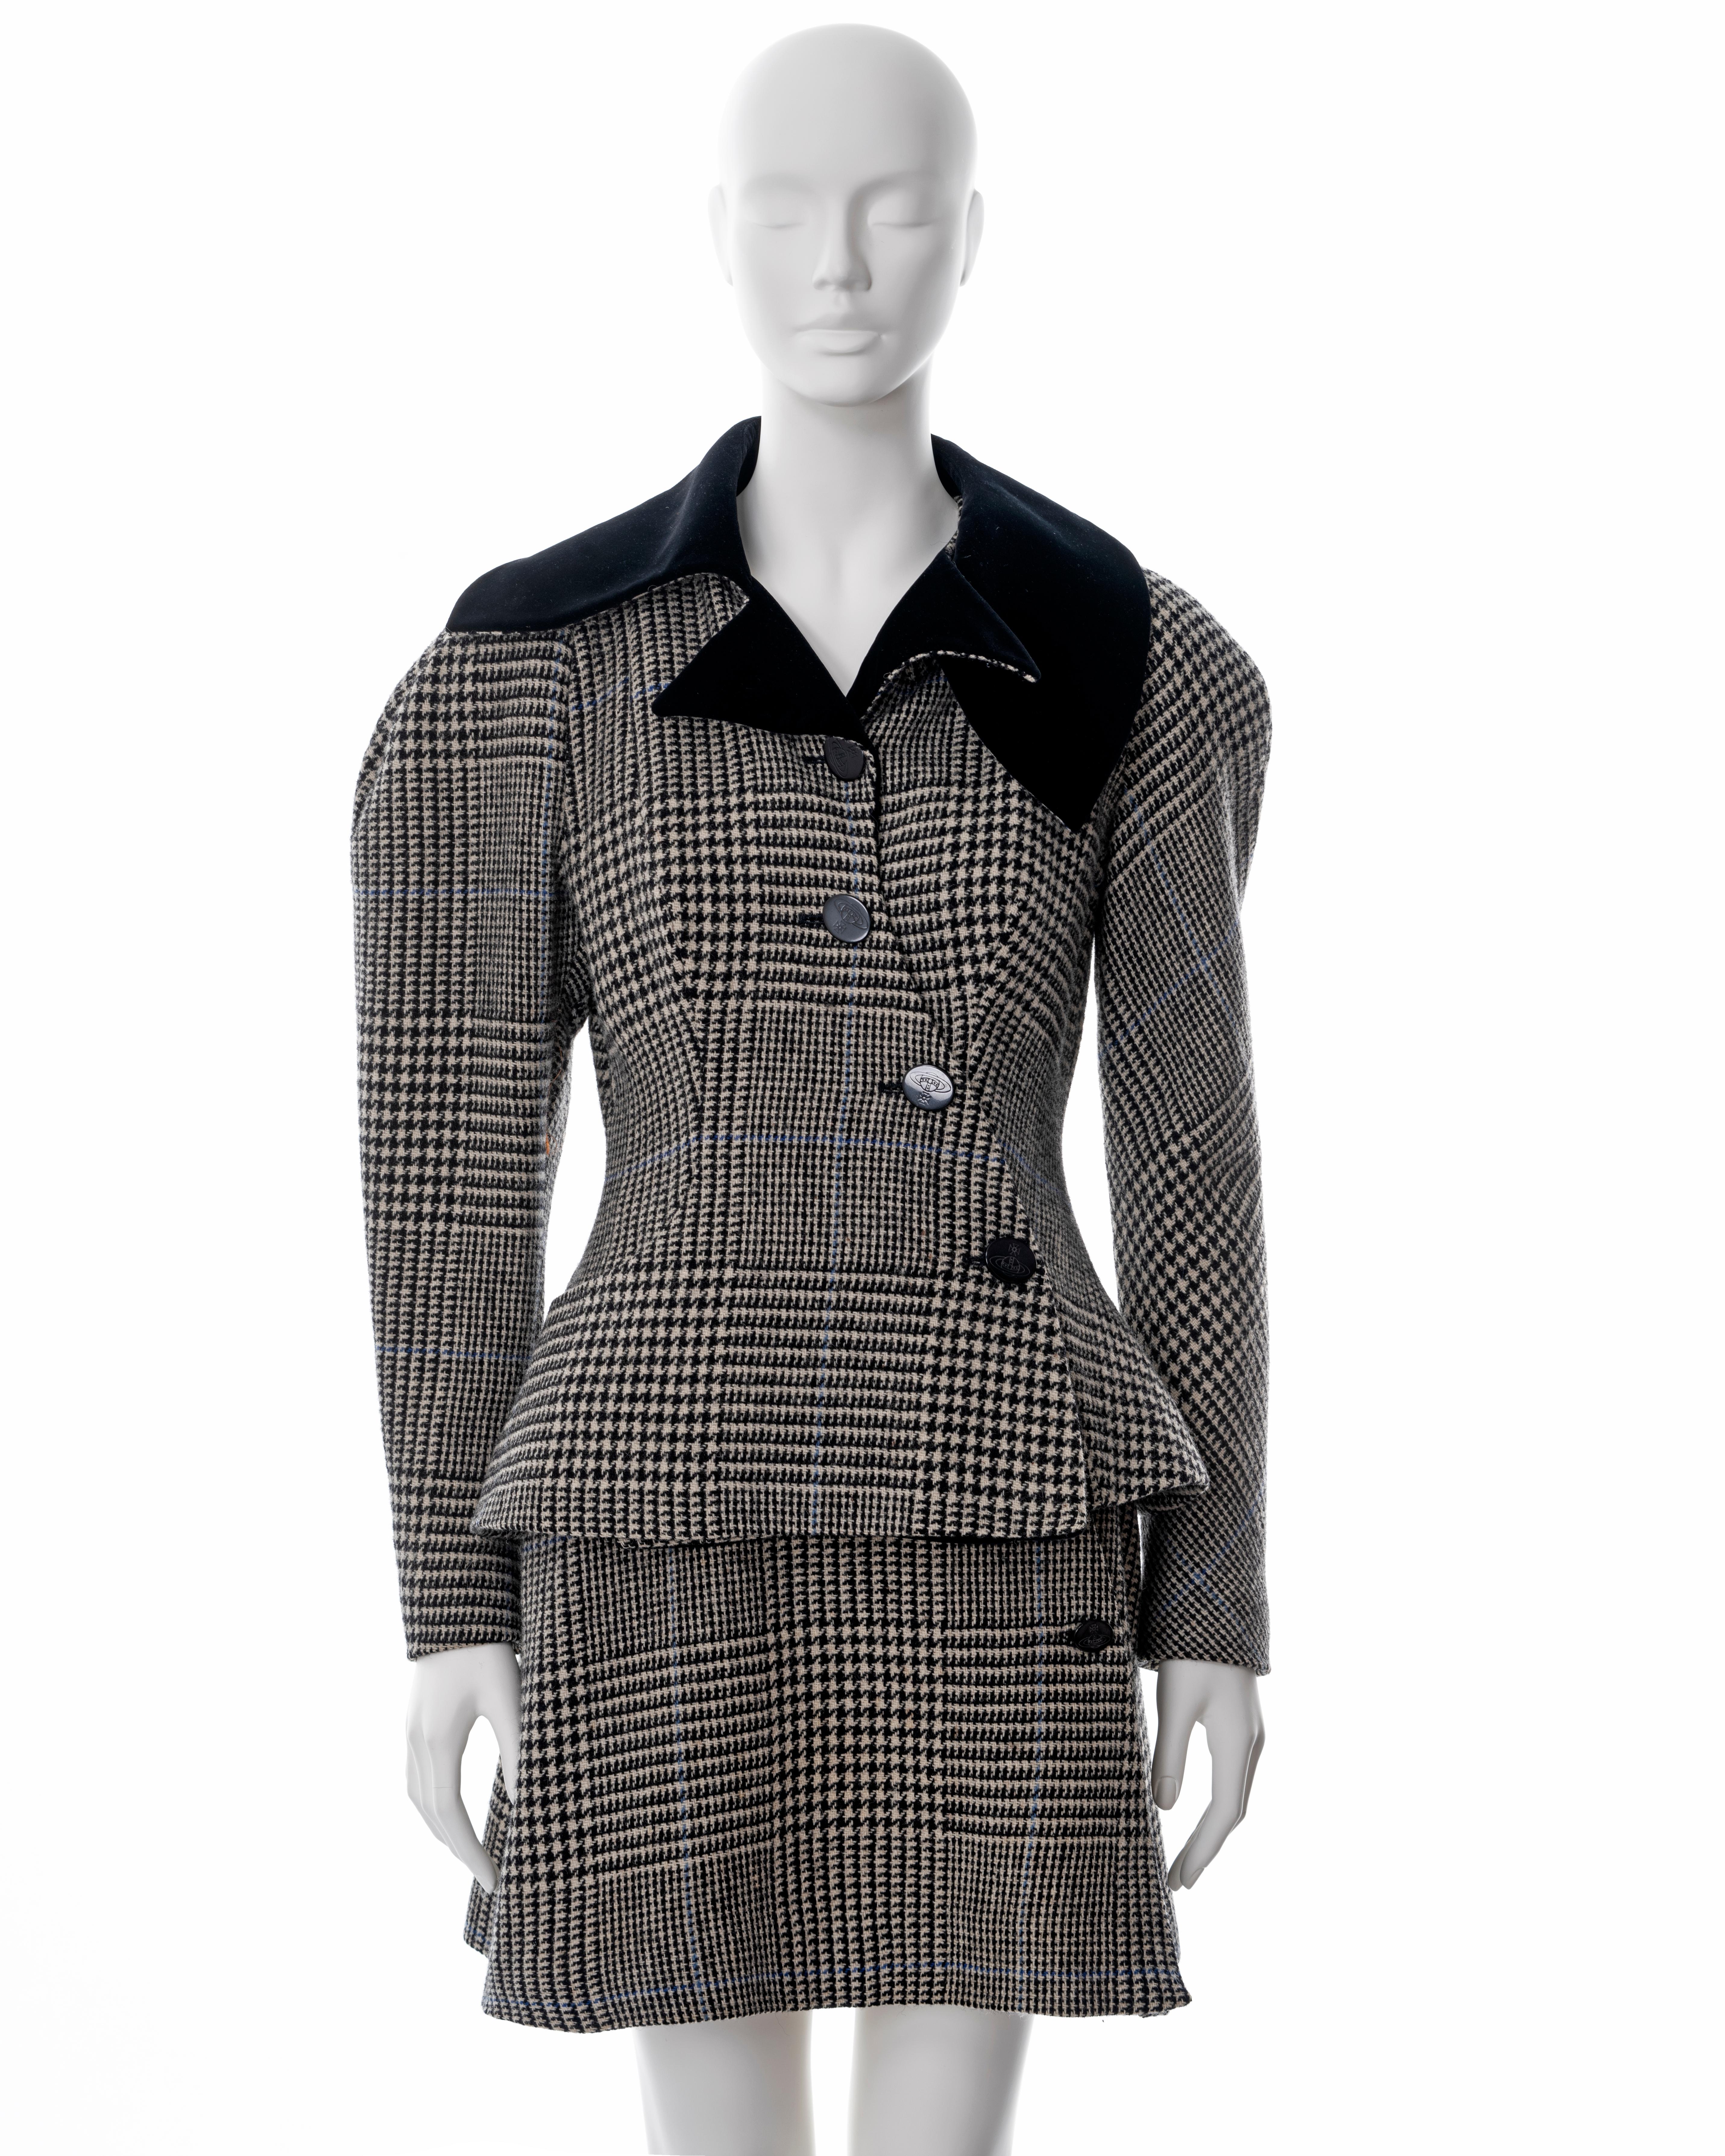 ▪ Vivienne Westwood grey houndstooth-check tweed skit suit
▪ Sold by One of a Kind Archive
▪ Fall-Winter 1996
▪ Harris Tweed 
▪ Asymmetric cut
▪ Hourglass shape 
▪ Leg-of-Mutton sleeves 
▪ Black velvet collar 
▪ Matching mini skirt 
▪ UK 10 - FR 38